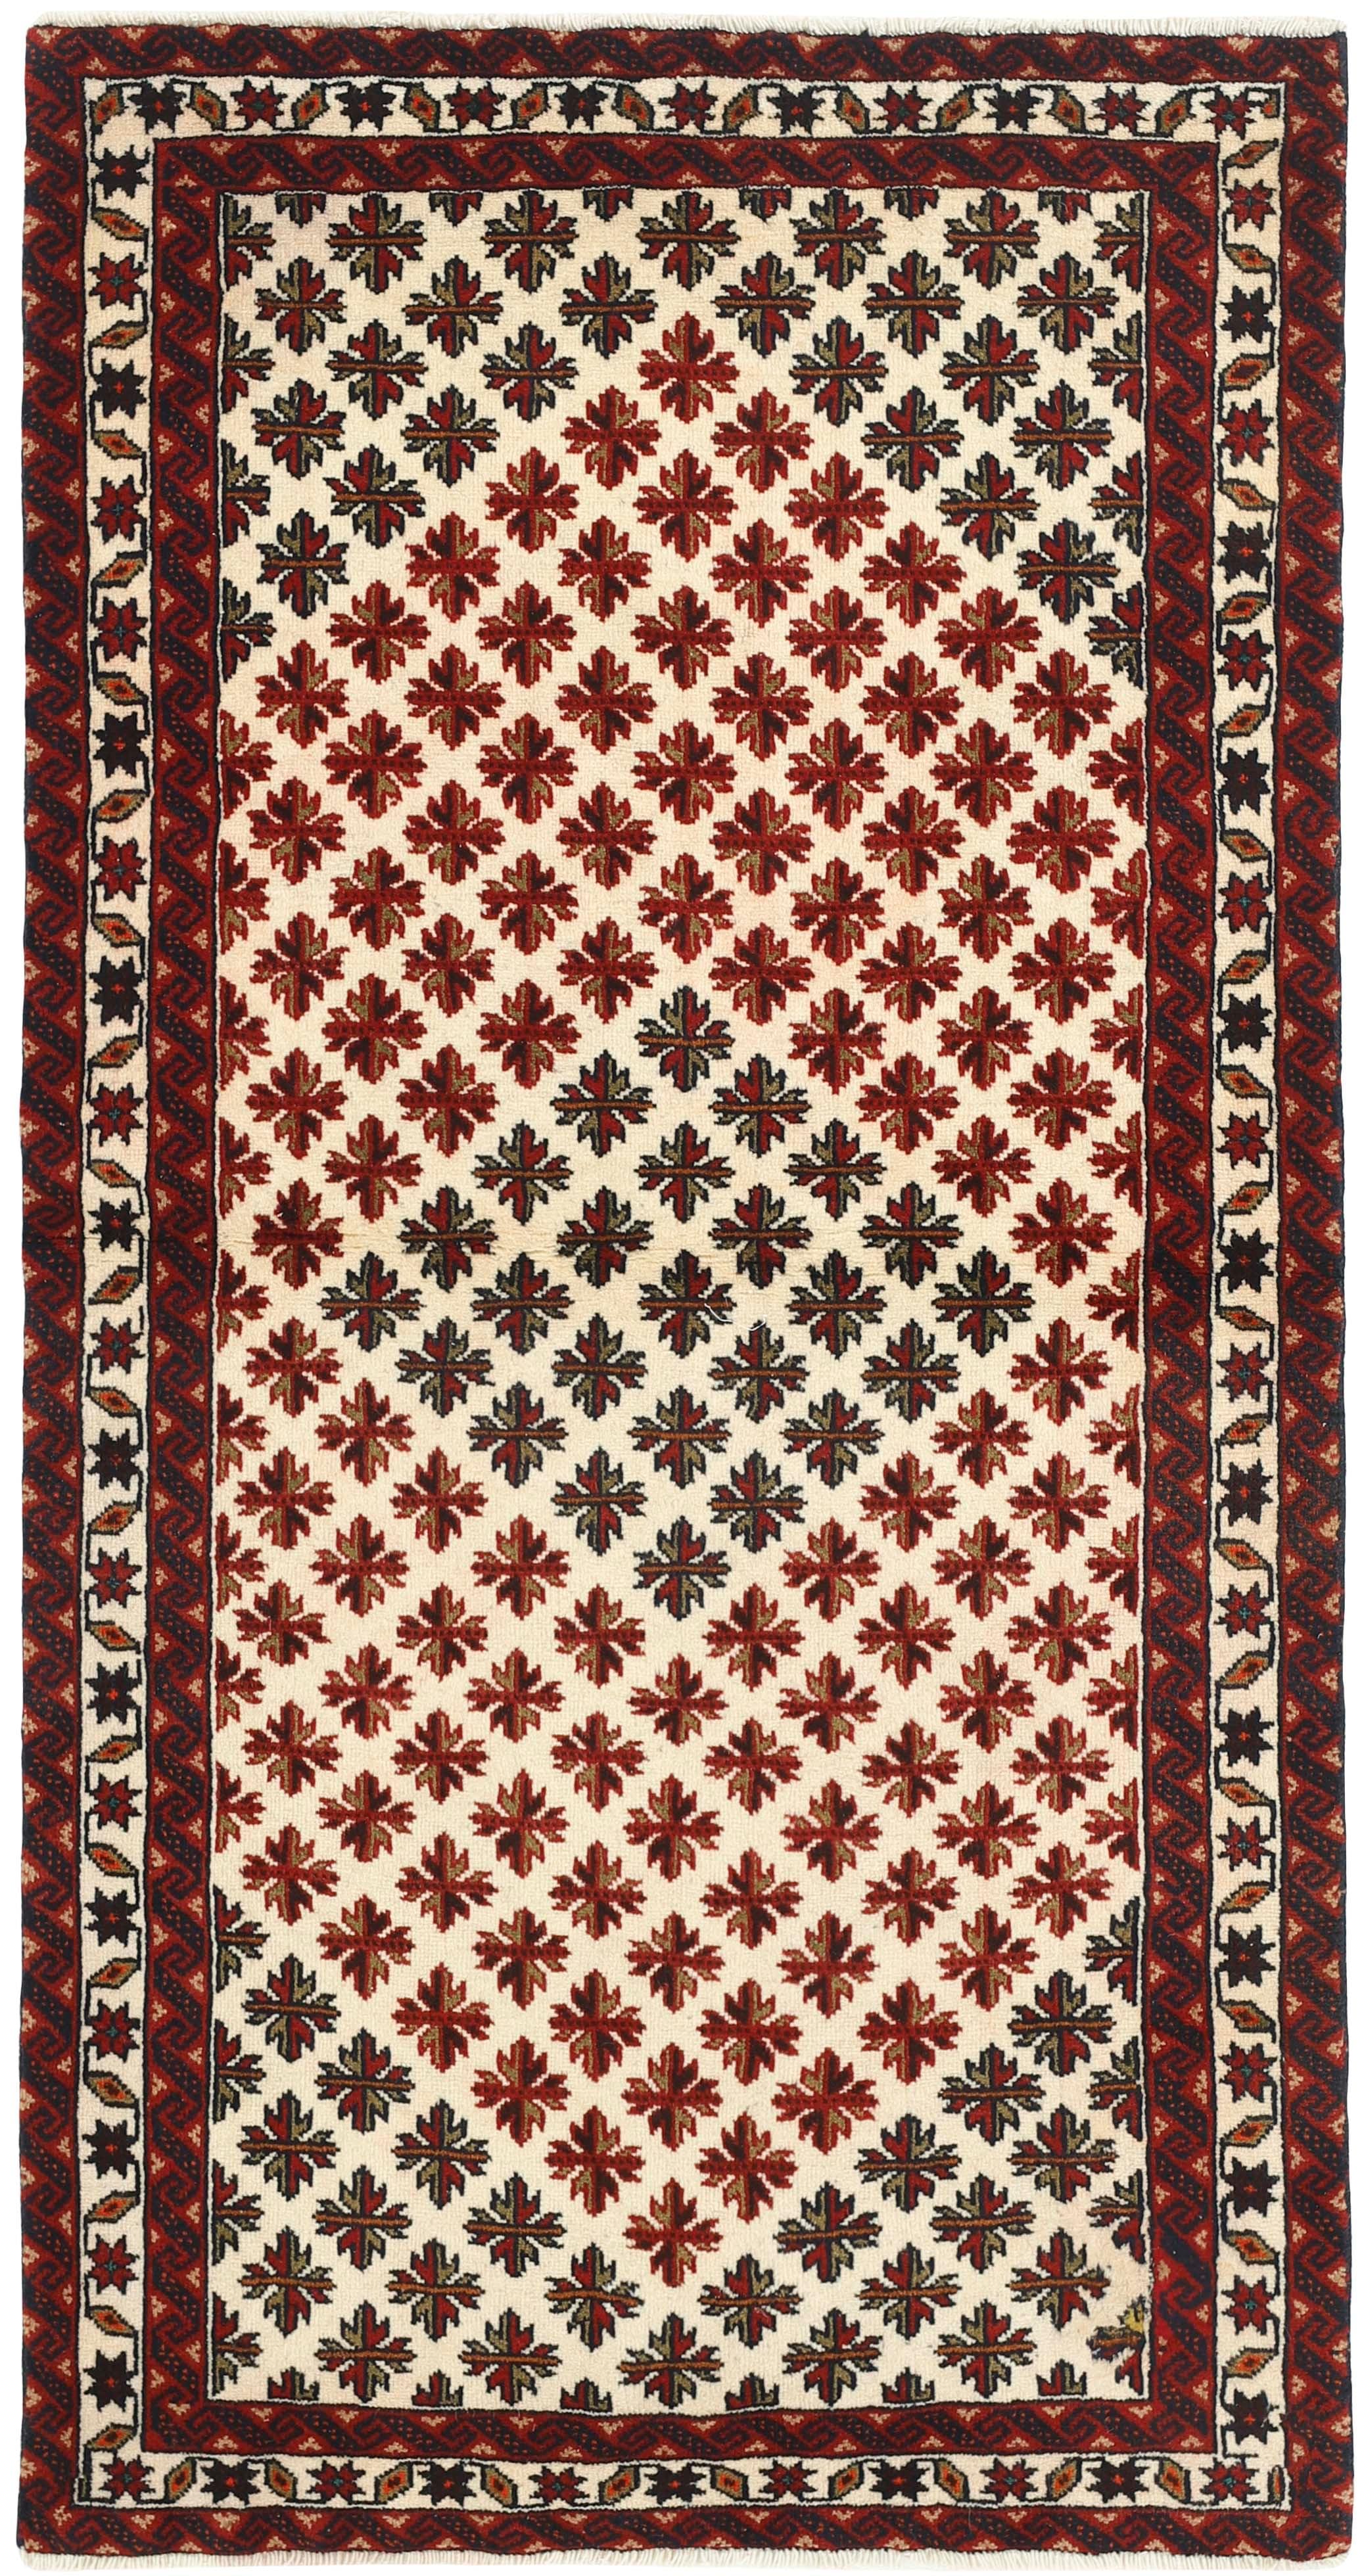 Multicolour Persian wool rug with traditional design